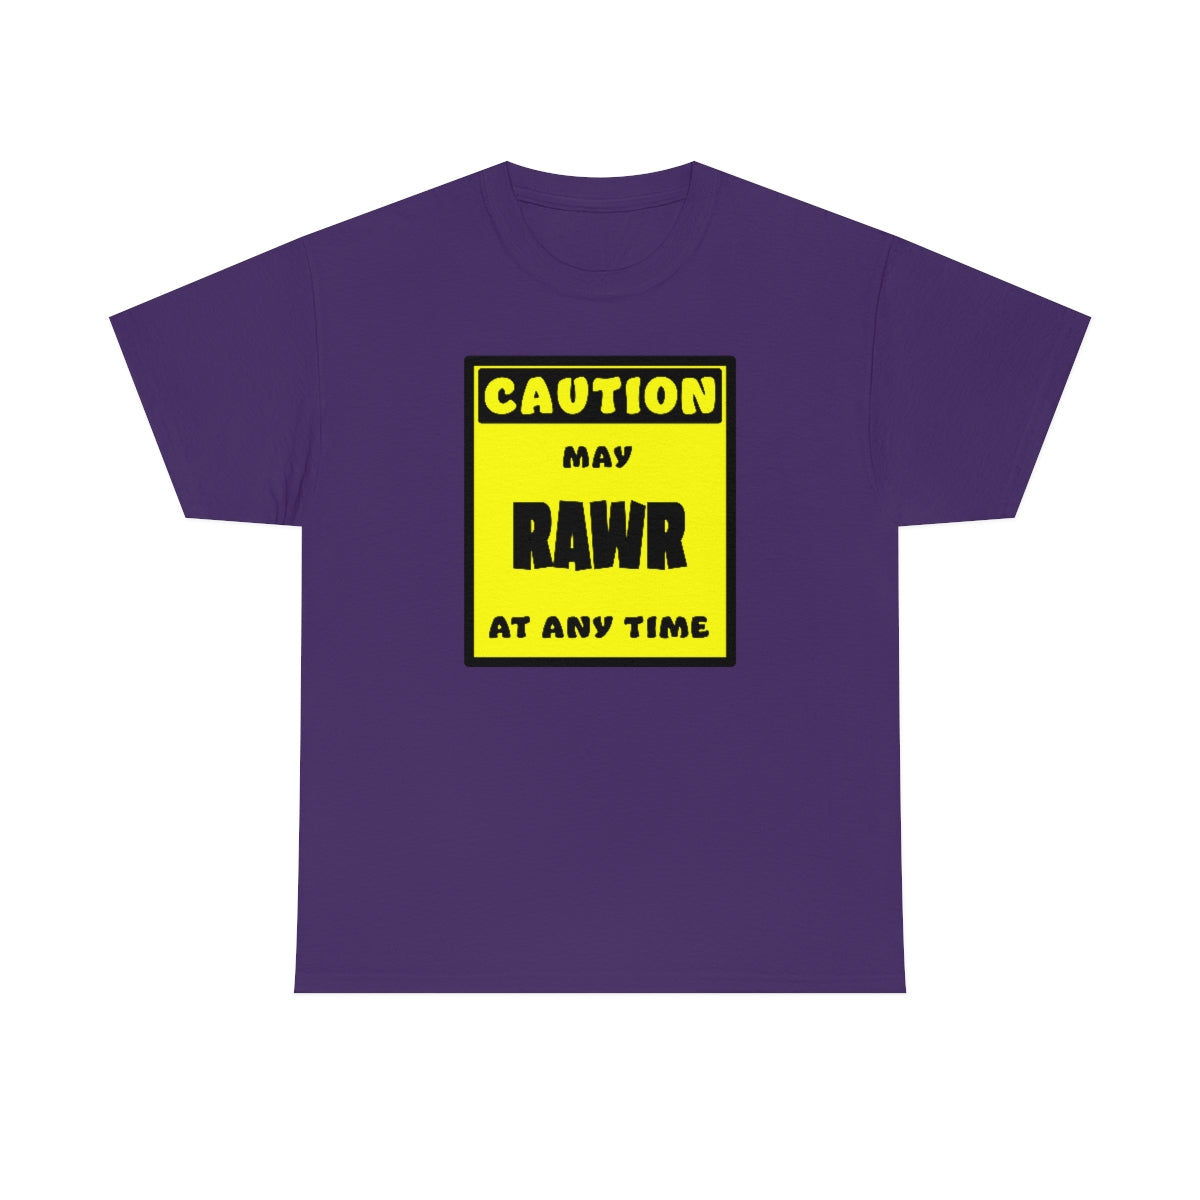 CAUTION! May RAWR at any time! - T-Shirt T-Shirt Artworktee Purple S 